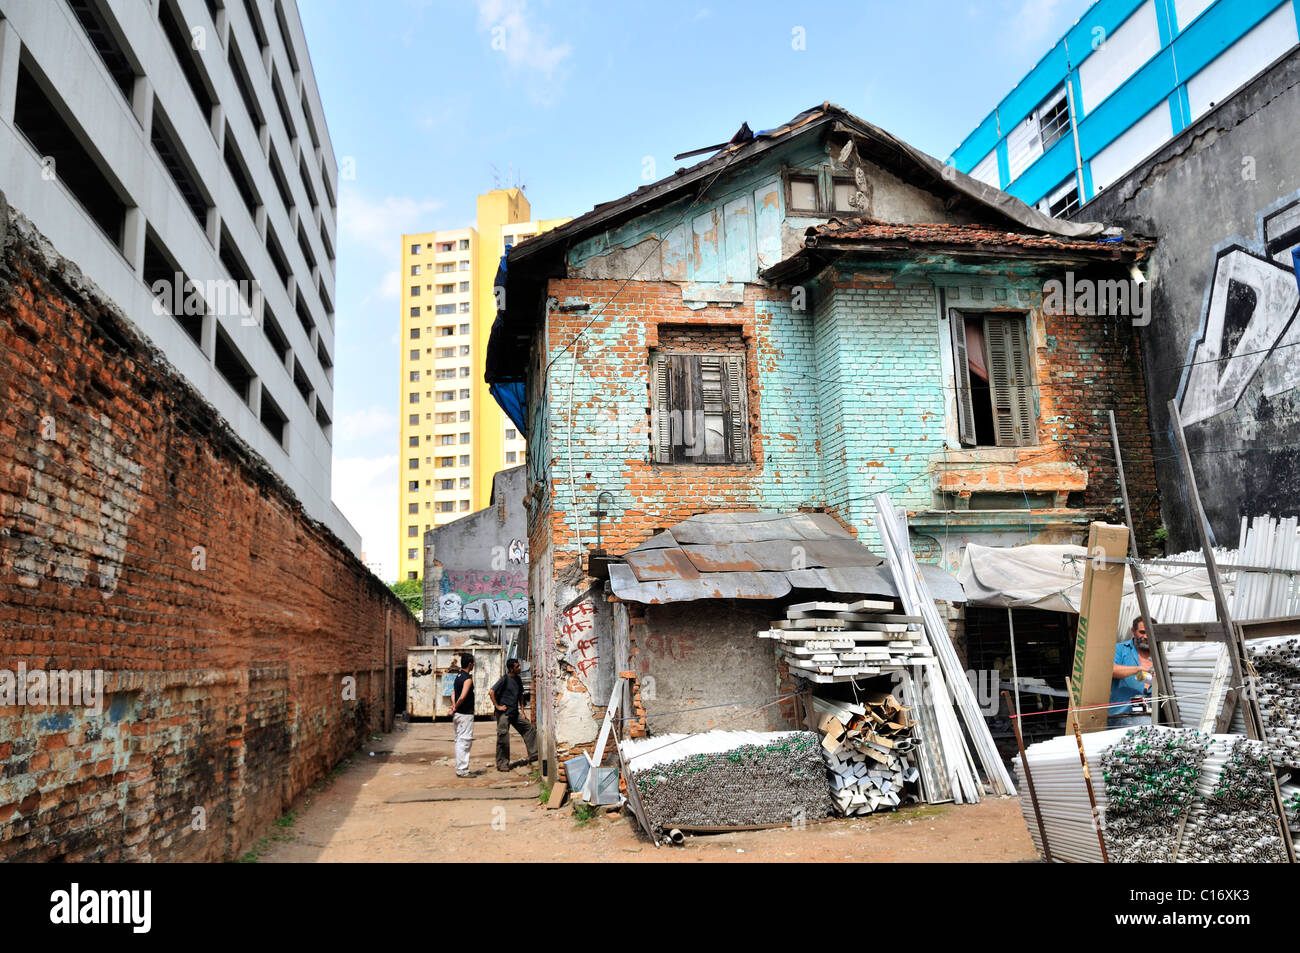 Old house between skyscrapers, Bras district, Sao Paulo, Brazil, South America Stock Photo